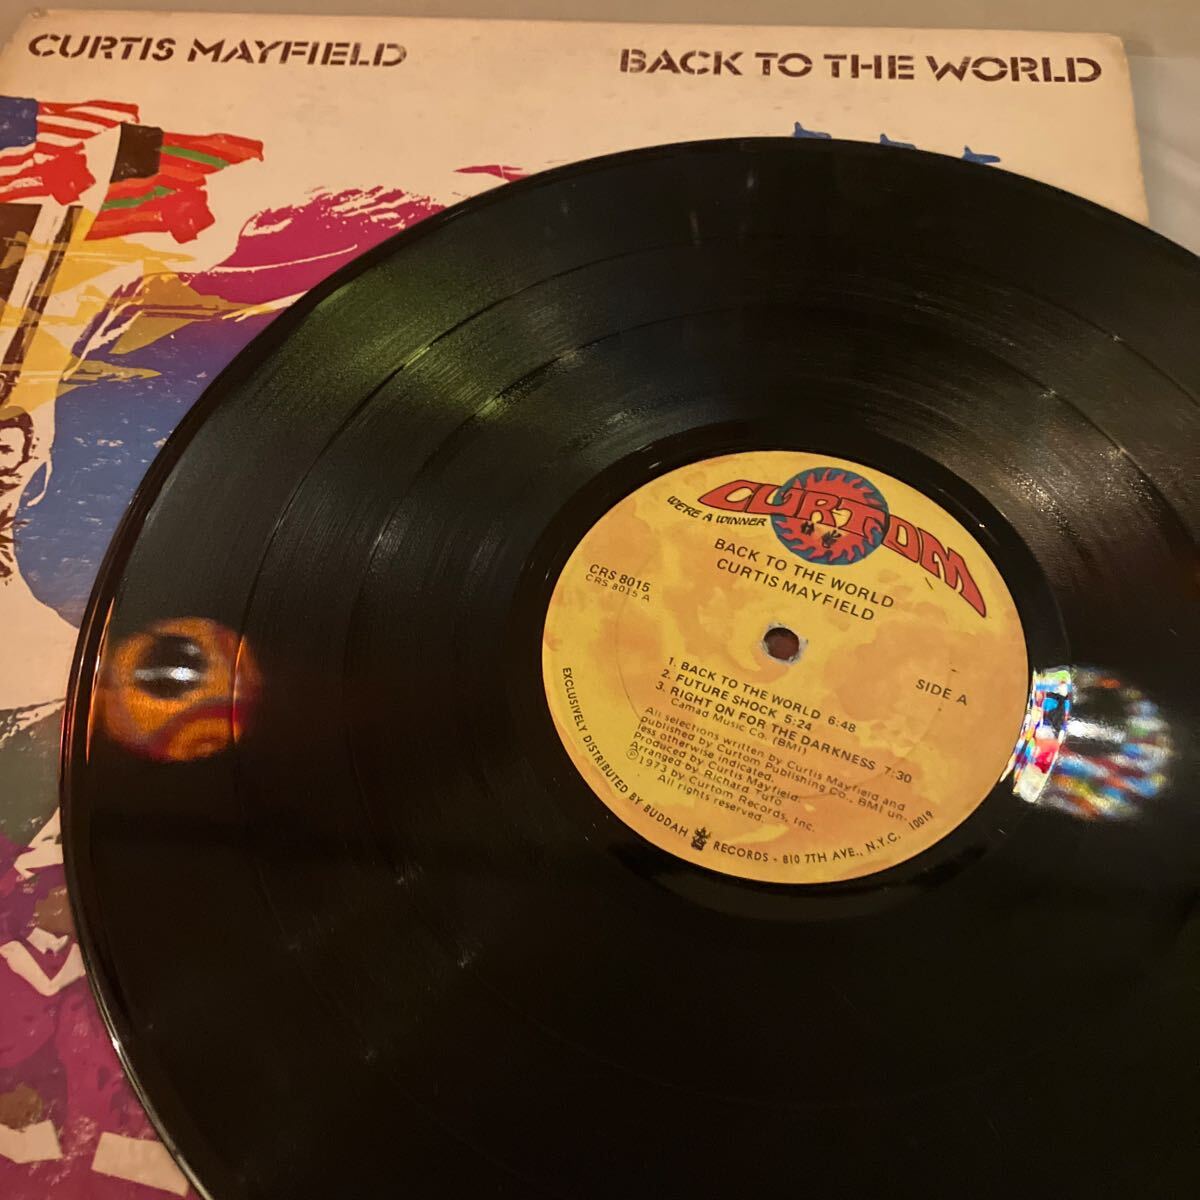 US ORIGINAL CURTIS MAYFIELD2枚セット！BACK TO THE WORLD(JKT/VG/RECORDS/VG薄いスリあり)/HEARTBEAT(VG +)シュリンクつき美品！の画像4